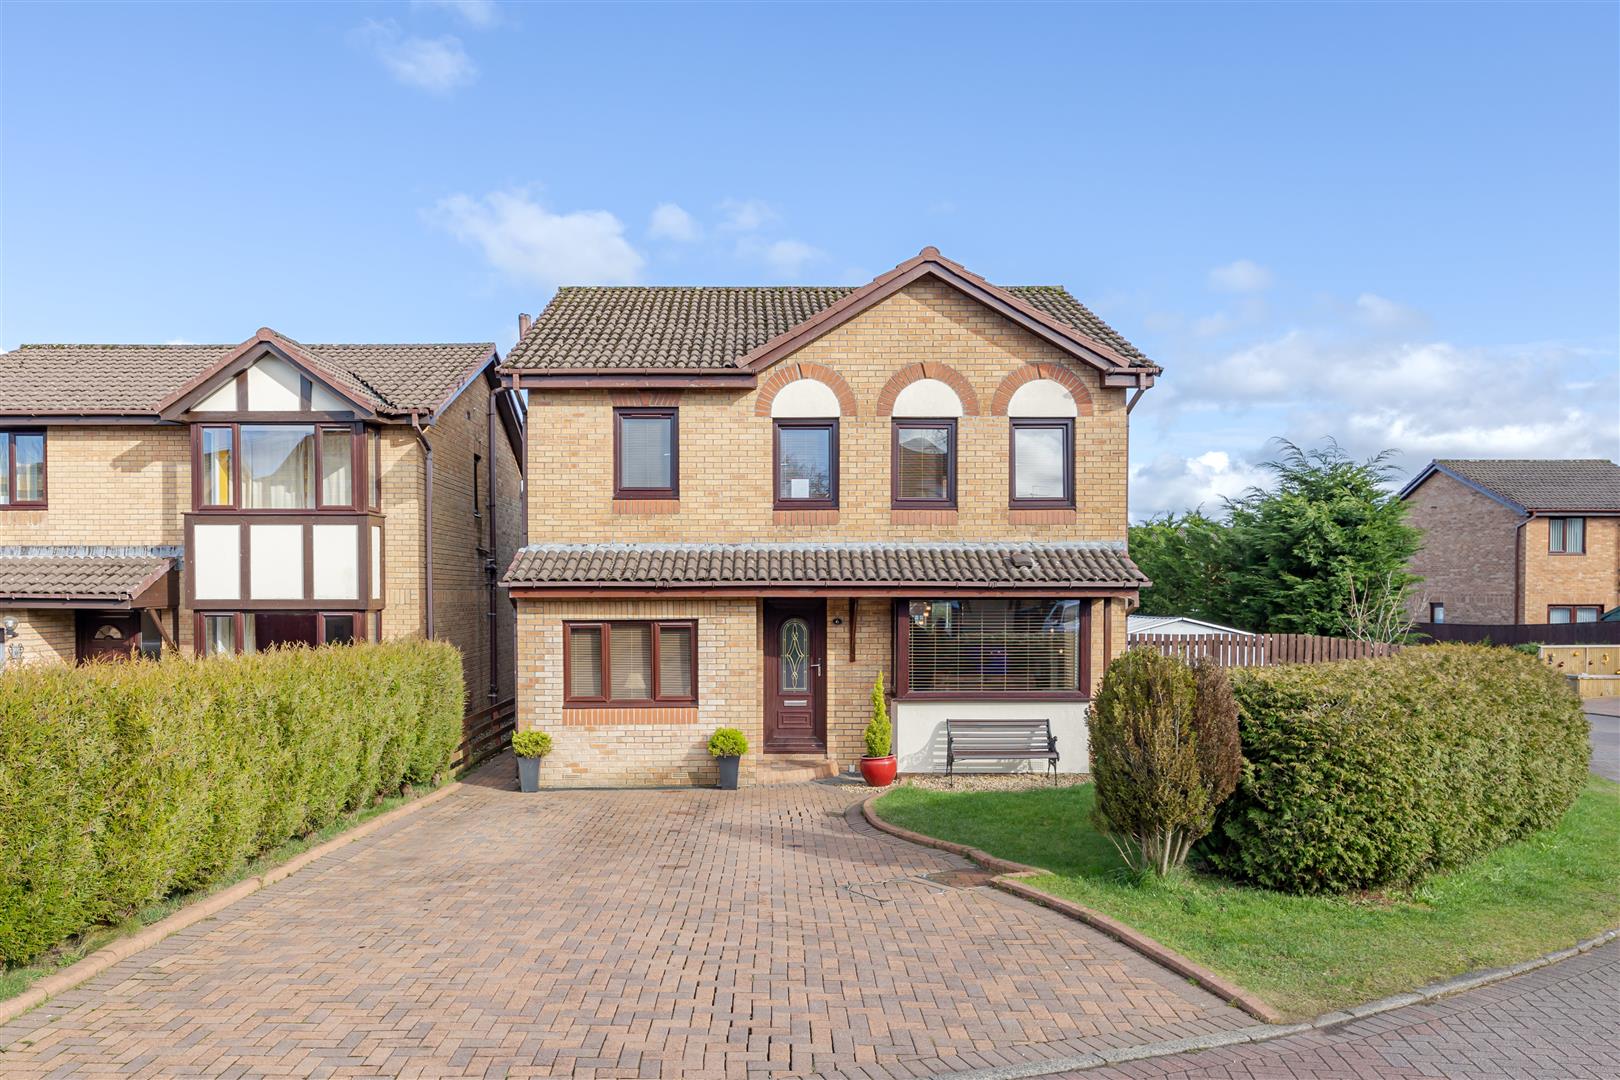 5 bed detached house for sale in Blantyre Gardens, Glasgow - Property Image 1